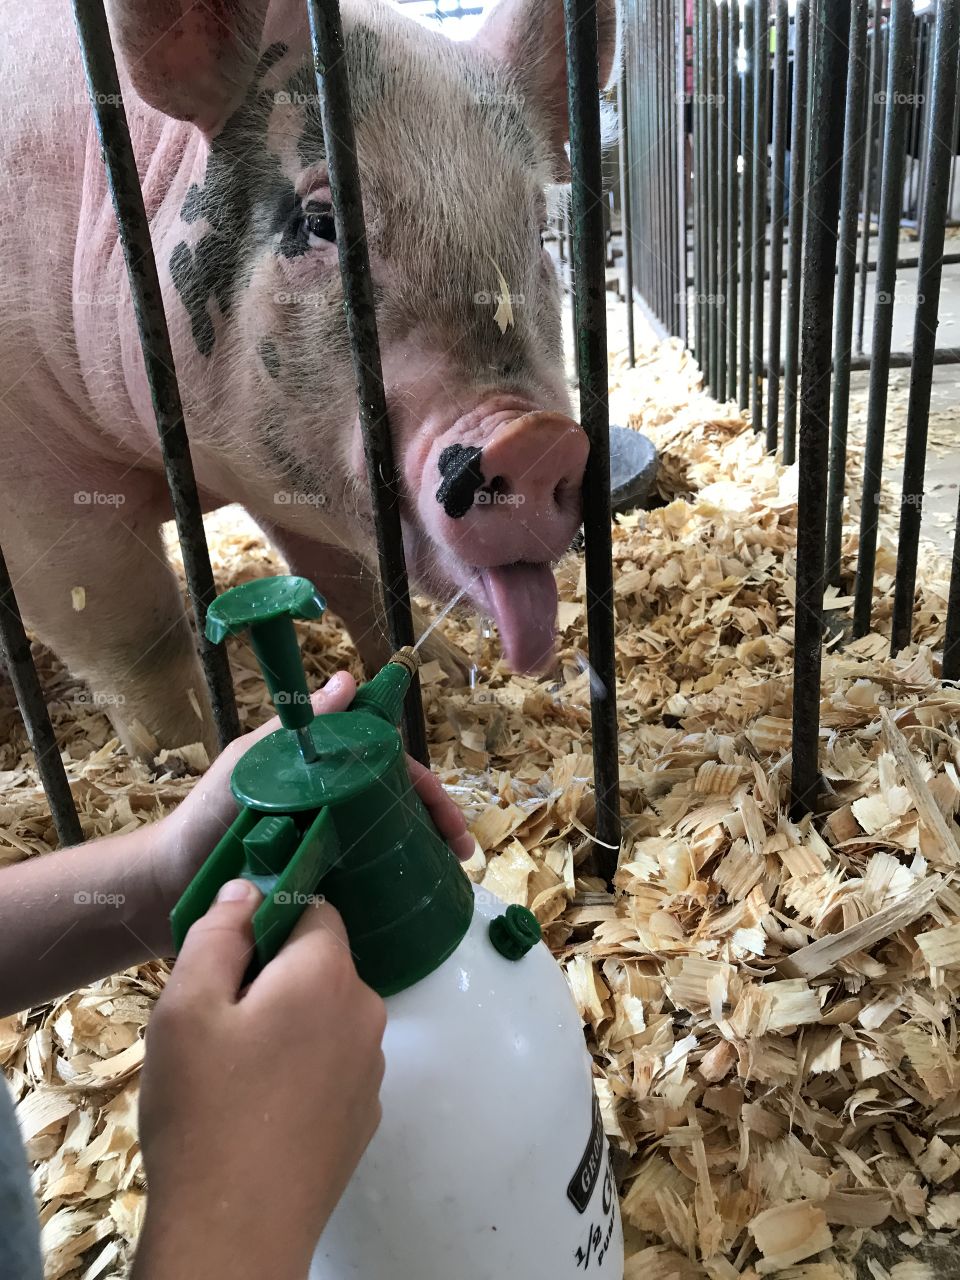 Pig sticks it tongue out for a drink at the fair